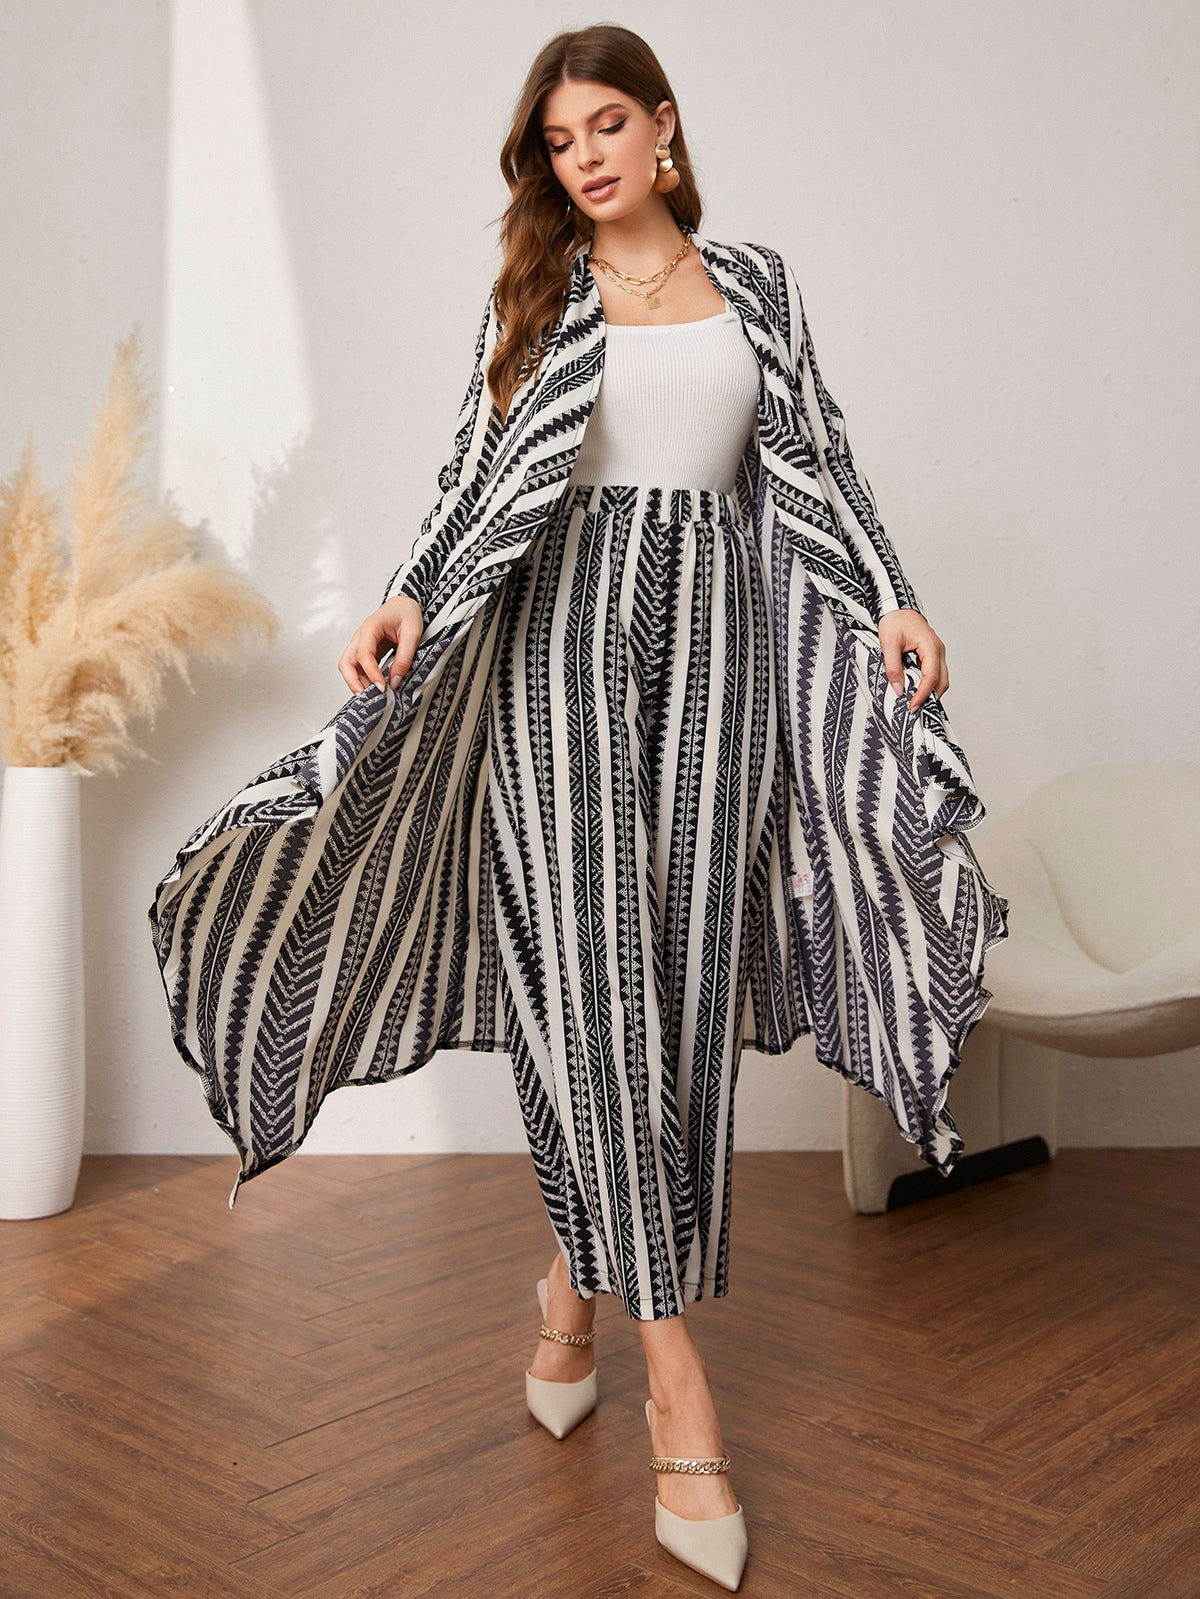 Tribal Print Coat and Pants - Black and White / XL